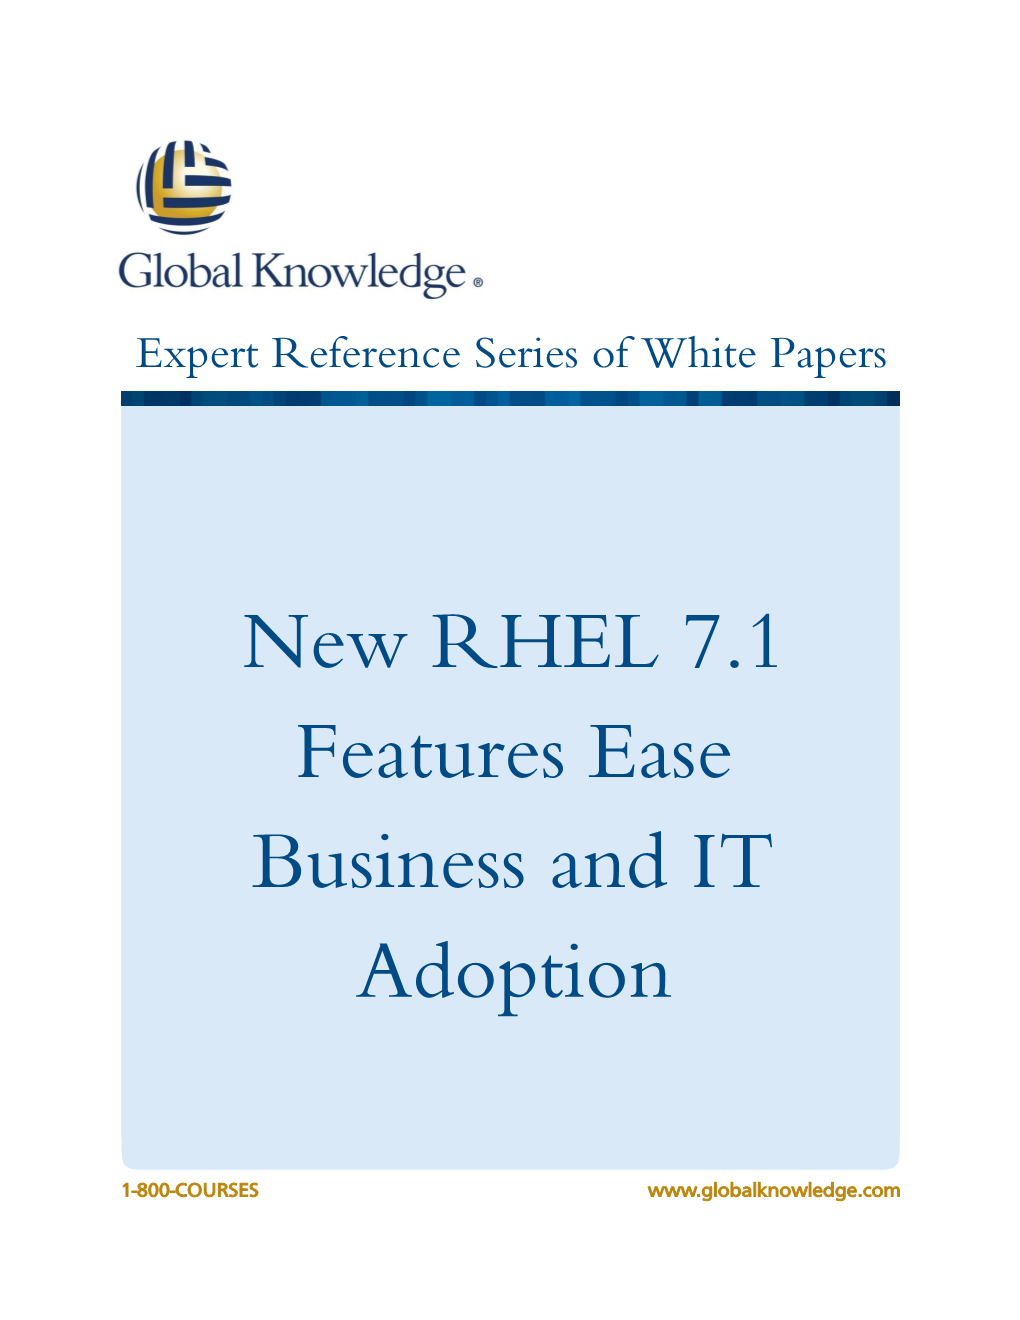 New RHEL 7.1 Features Ease Business and IT Adoption Kerry Doyle, MA, CPL